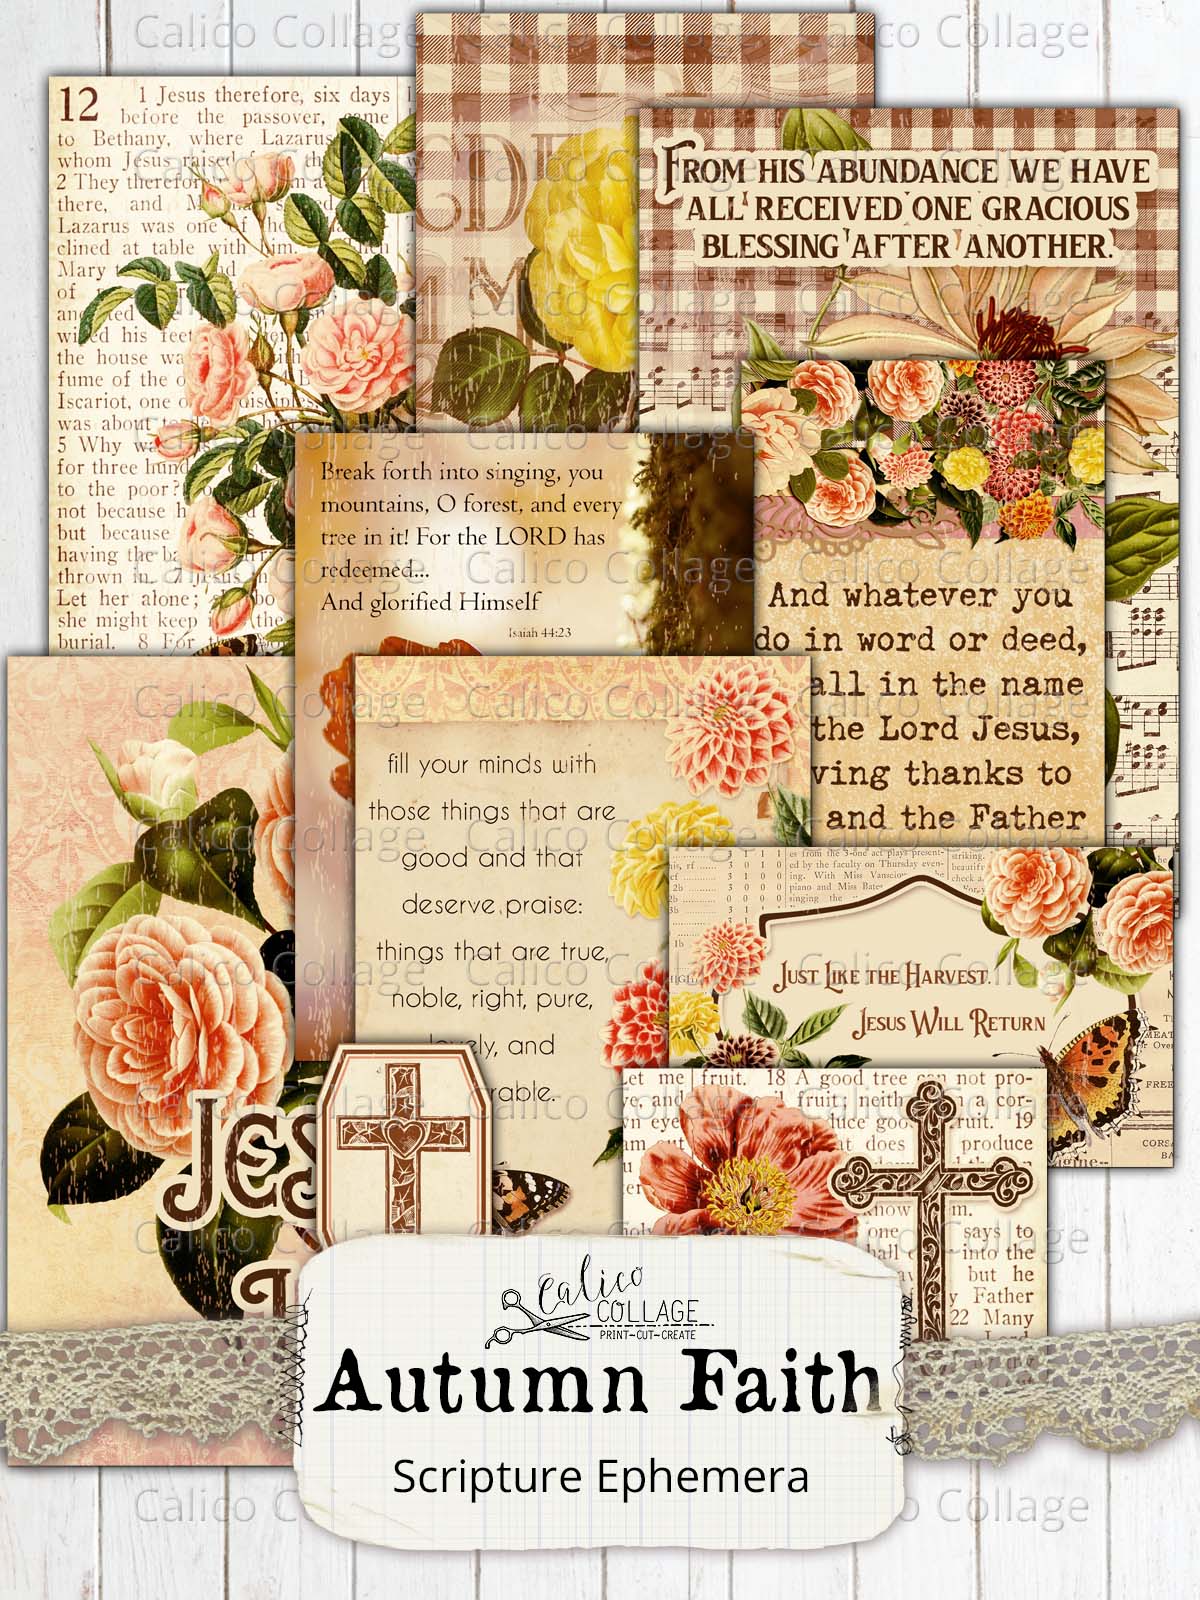 Christian Faith Vintage Junk Journal Pages And Ephemera: Over 210 Catholic  & Bible Scripture Themed Labels, Postcards, Tags, Papers & Ephemera Pieces